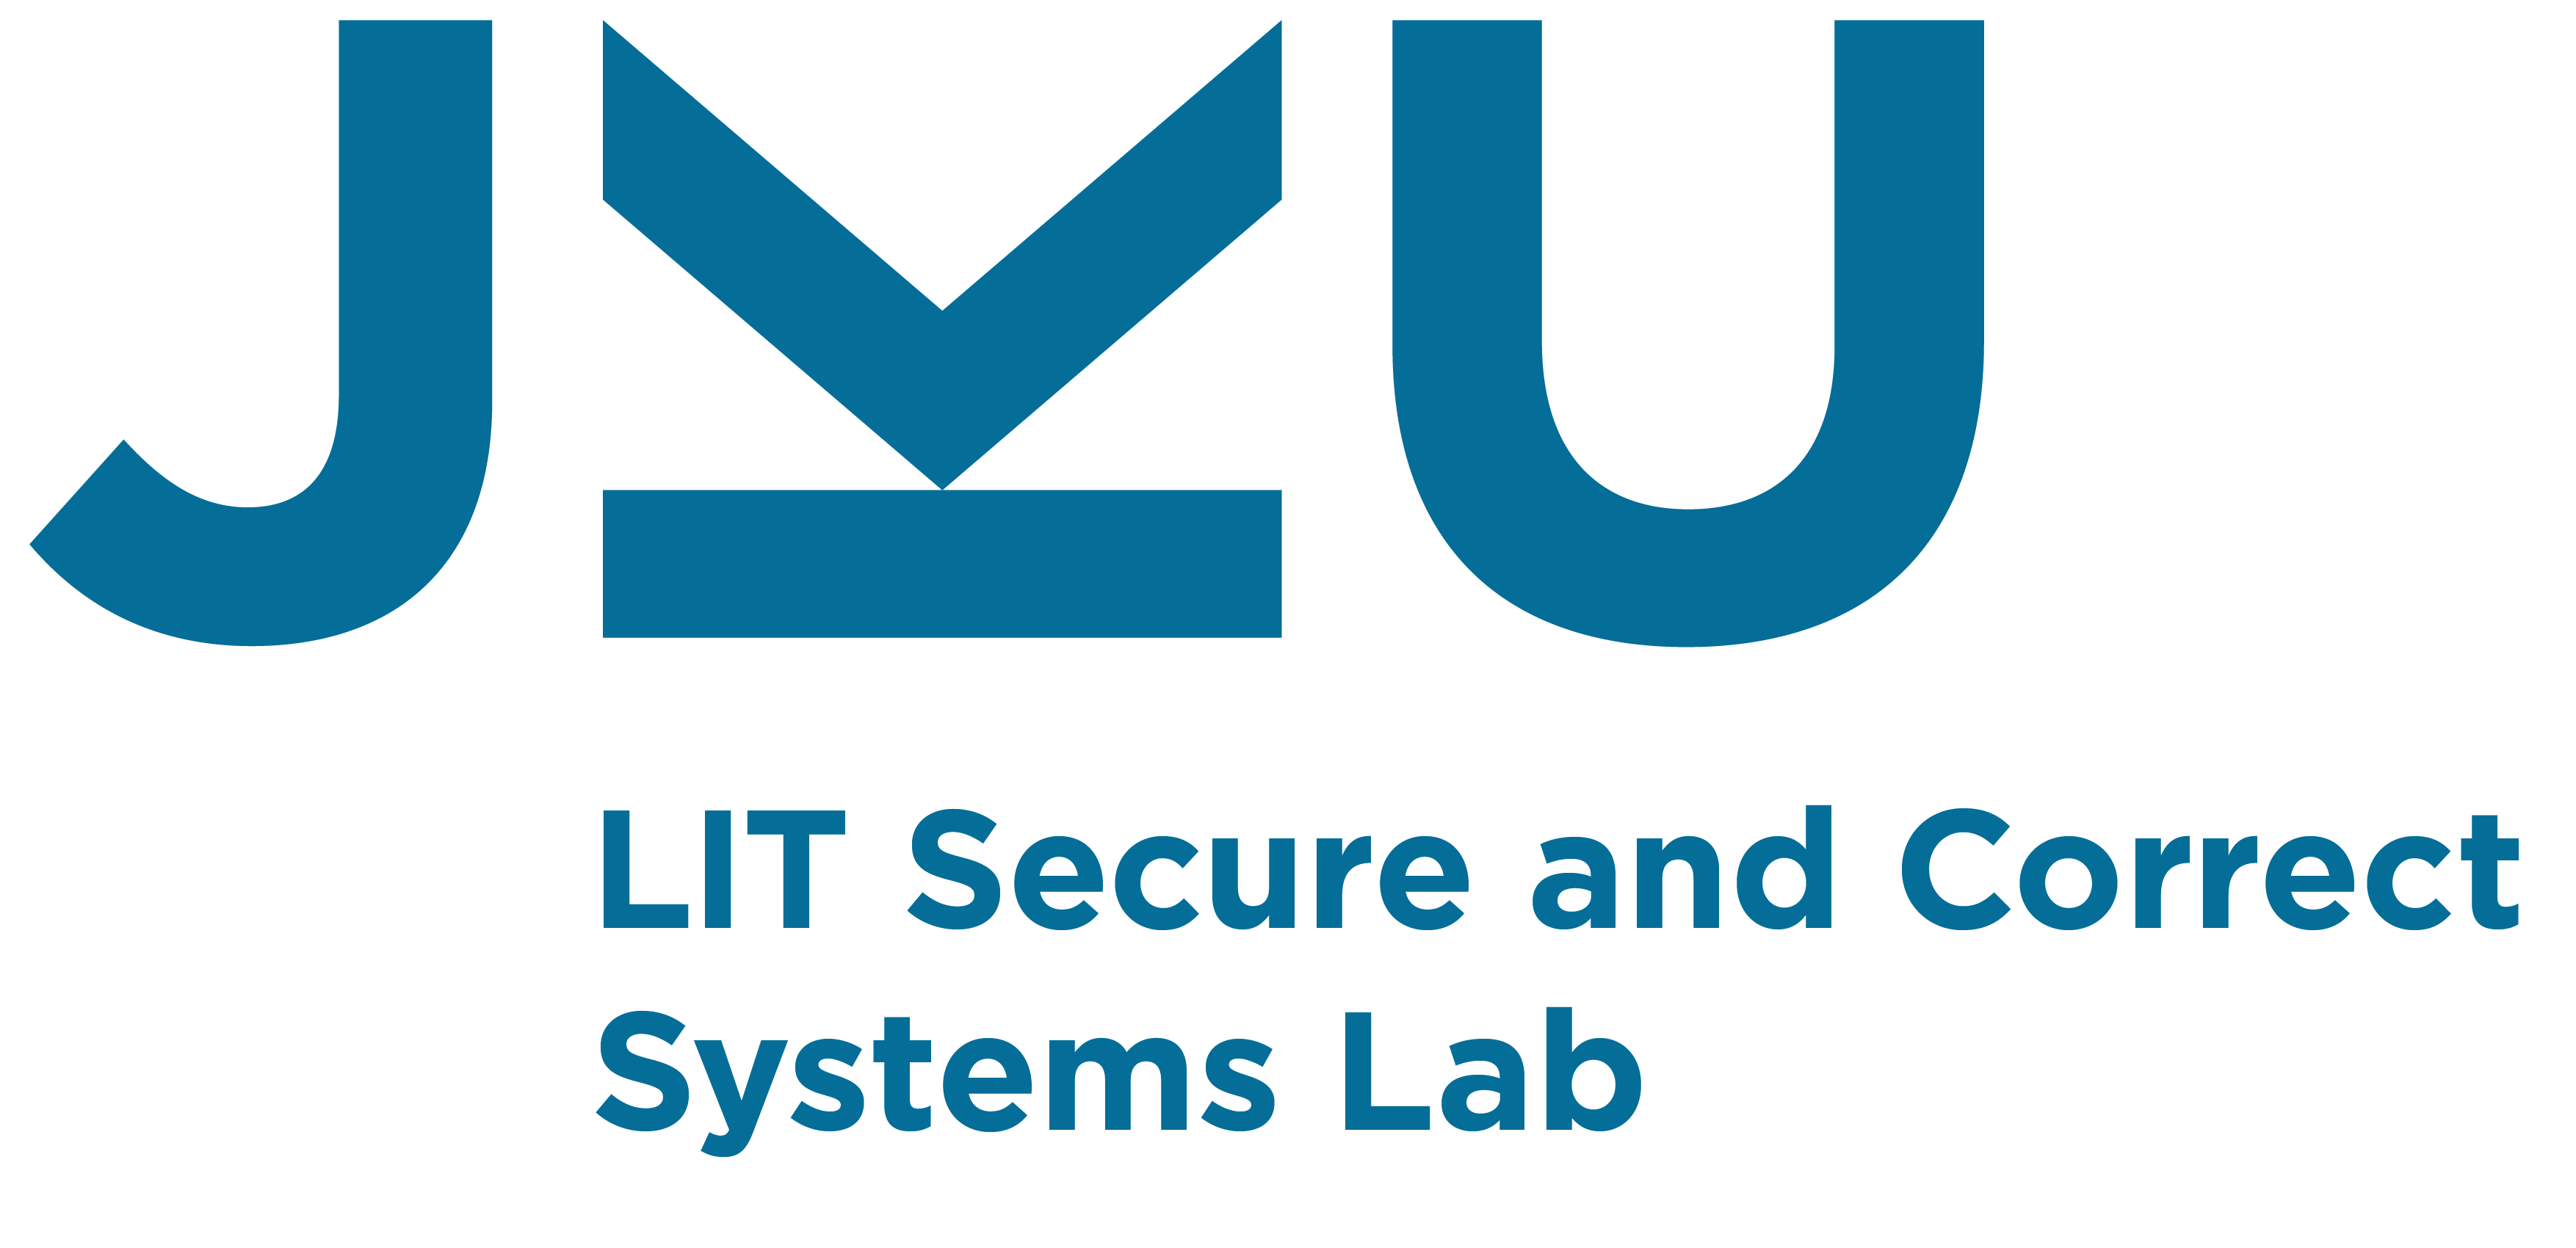 LIT Secure and Correct Systems Laboratory